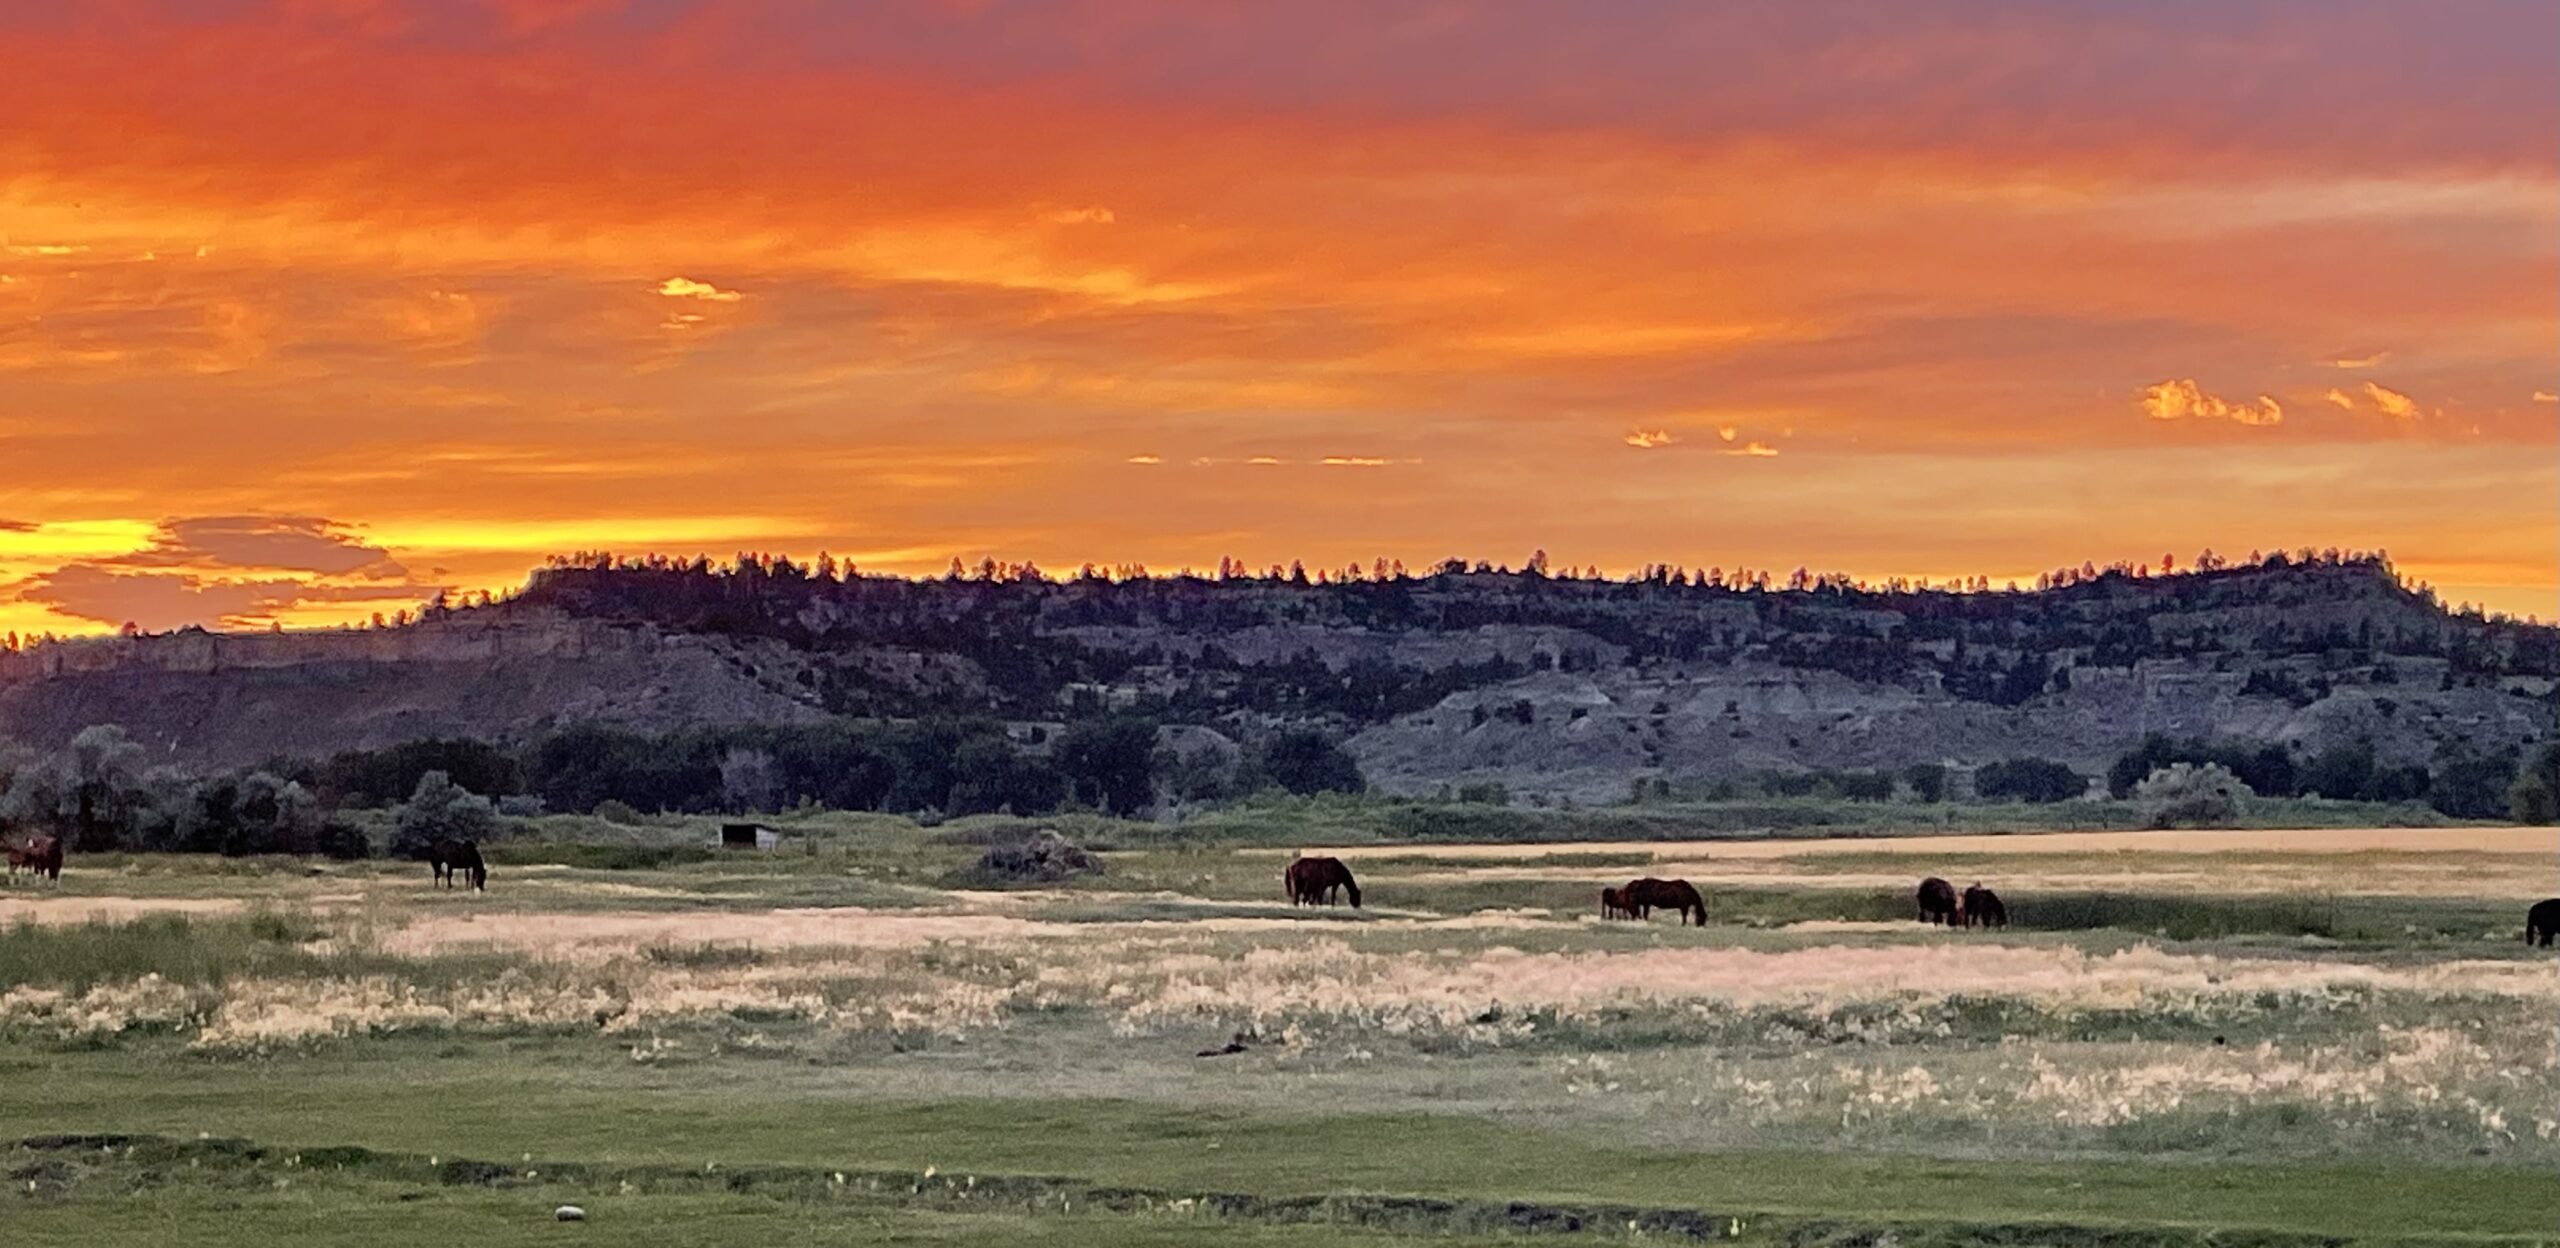 Beautiful photo of horses in a field in Montana at sunset